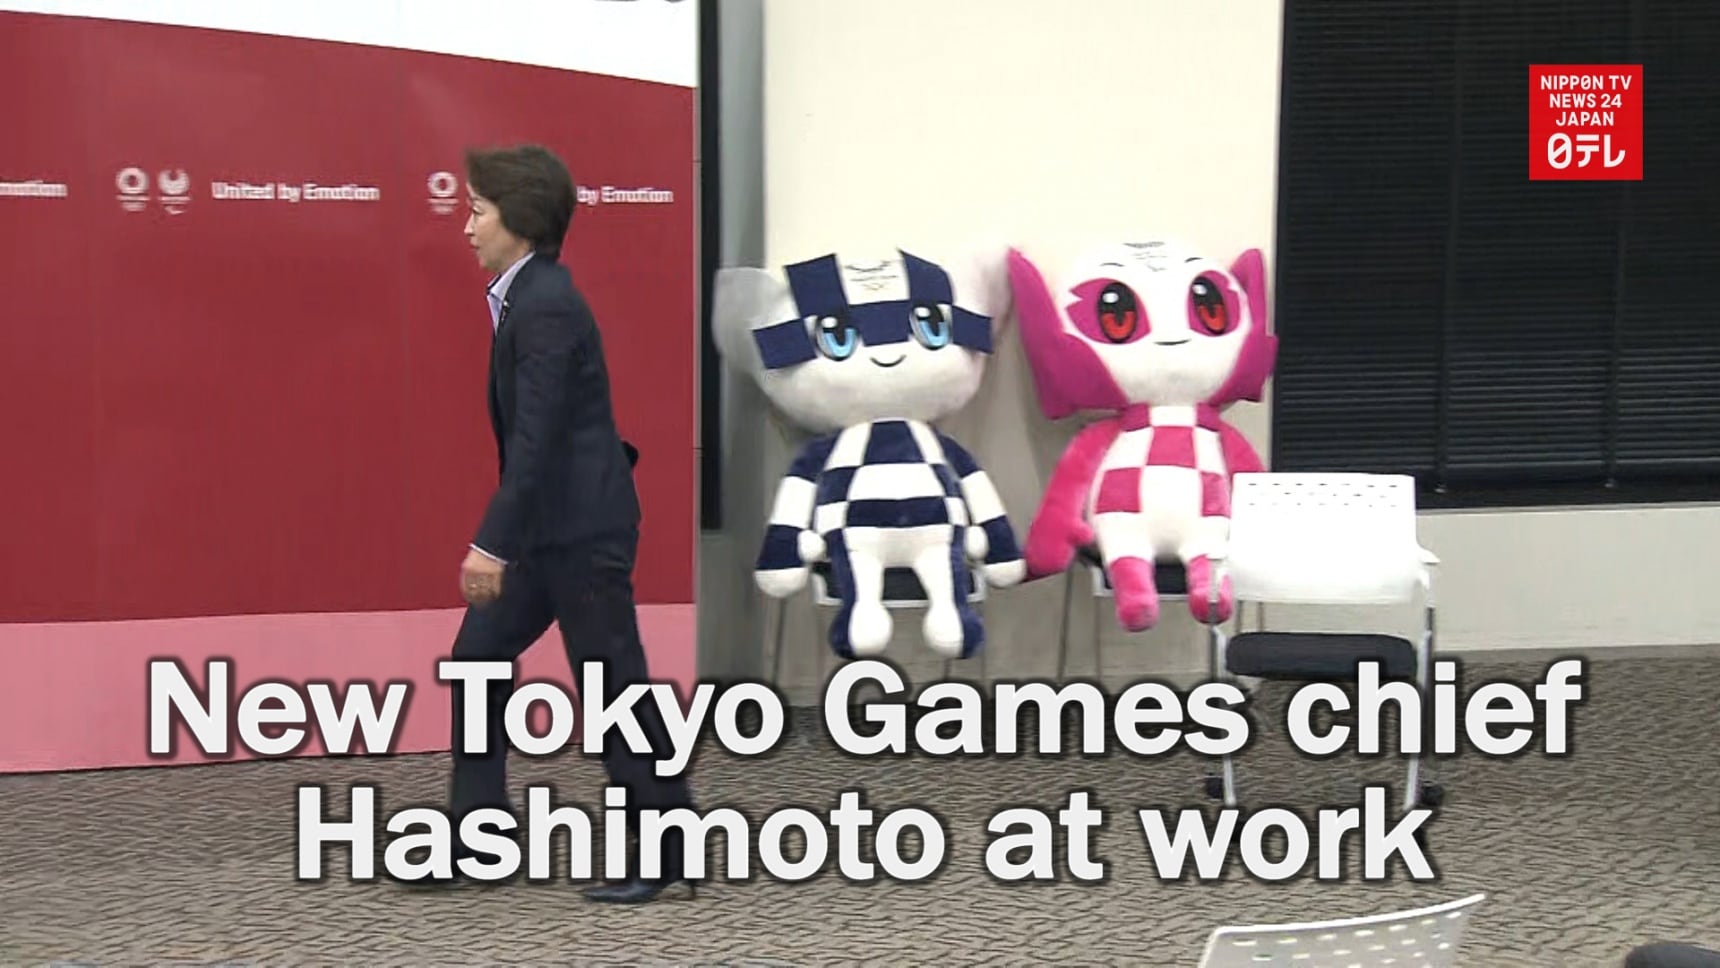 Hashimoto's 1st Day as Tokyo 2020 Games Chief